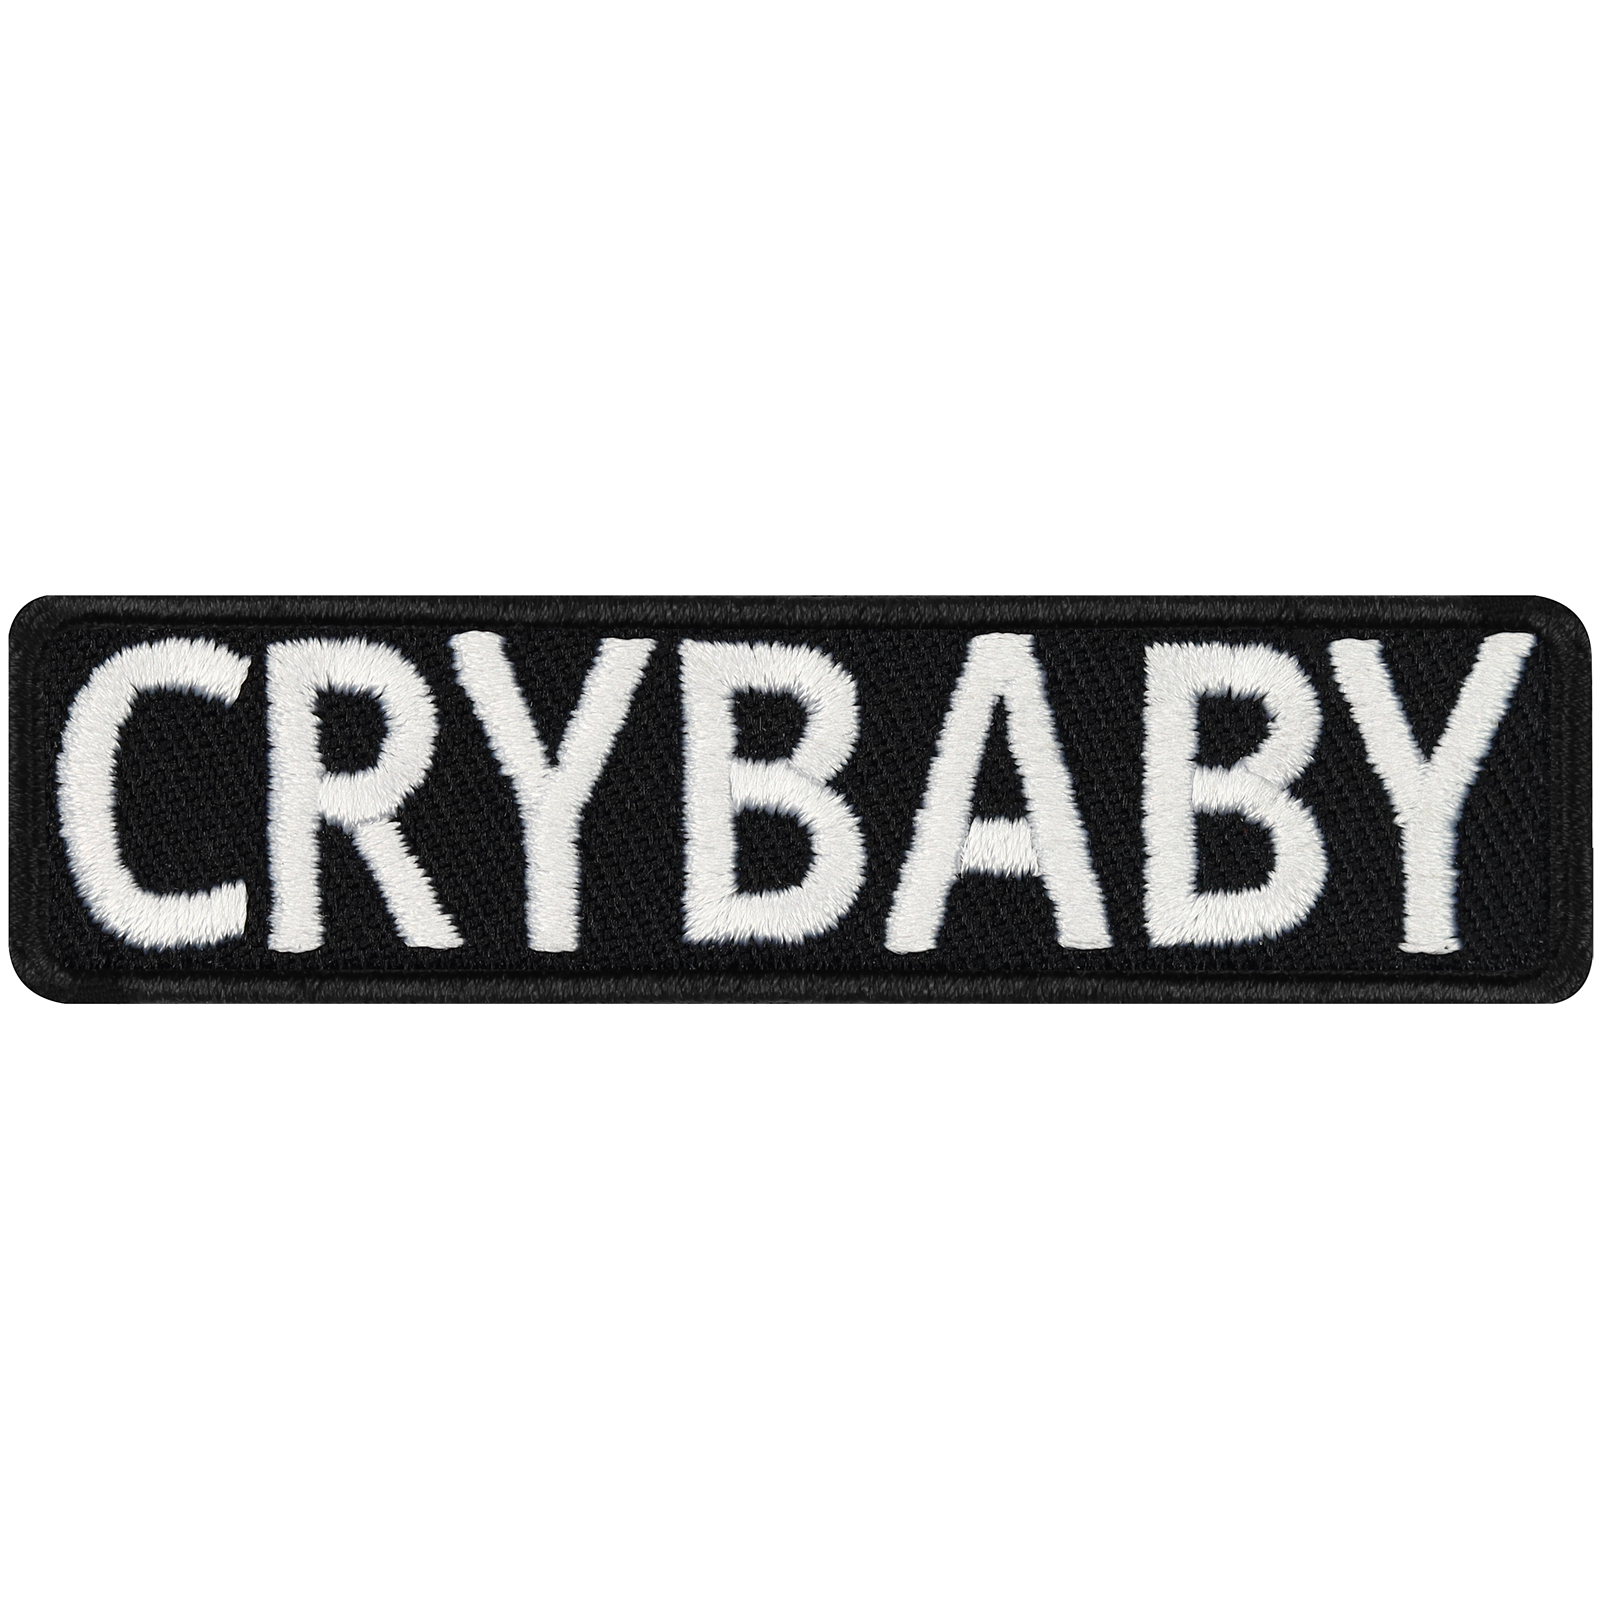 Crybaby - Patch